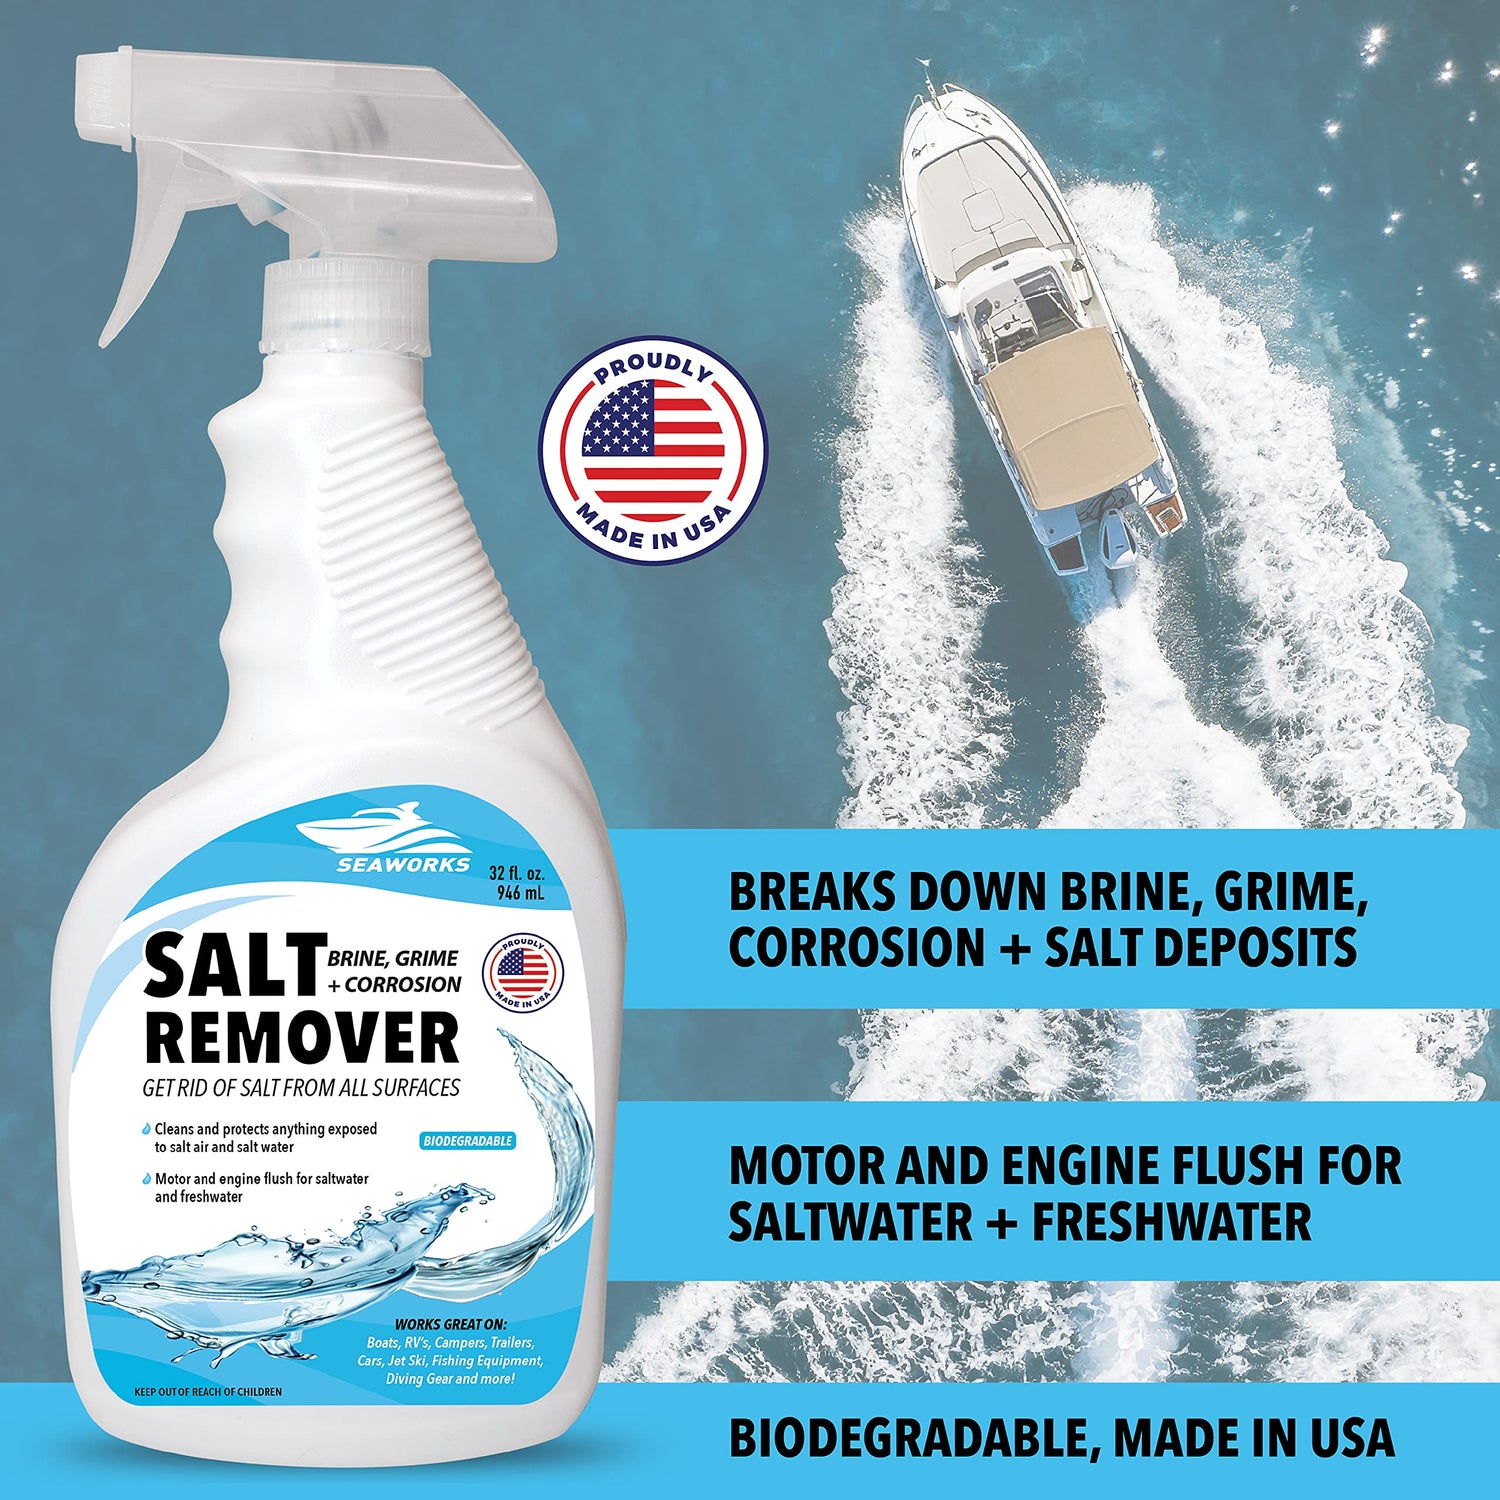 Salt-Away Salt Remover Spray 32oz Concentrate with Mixing Unit